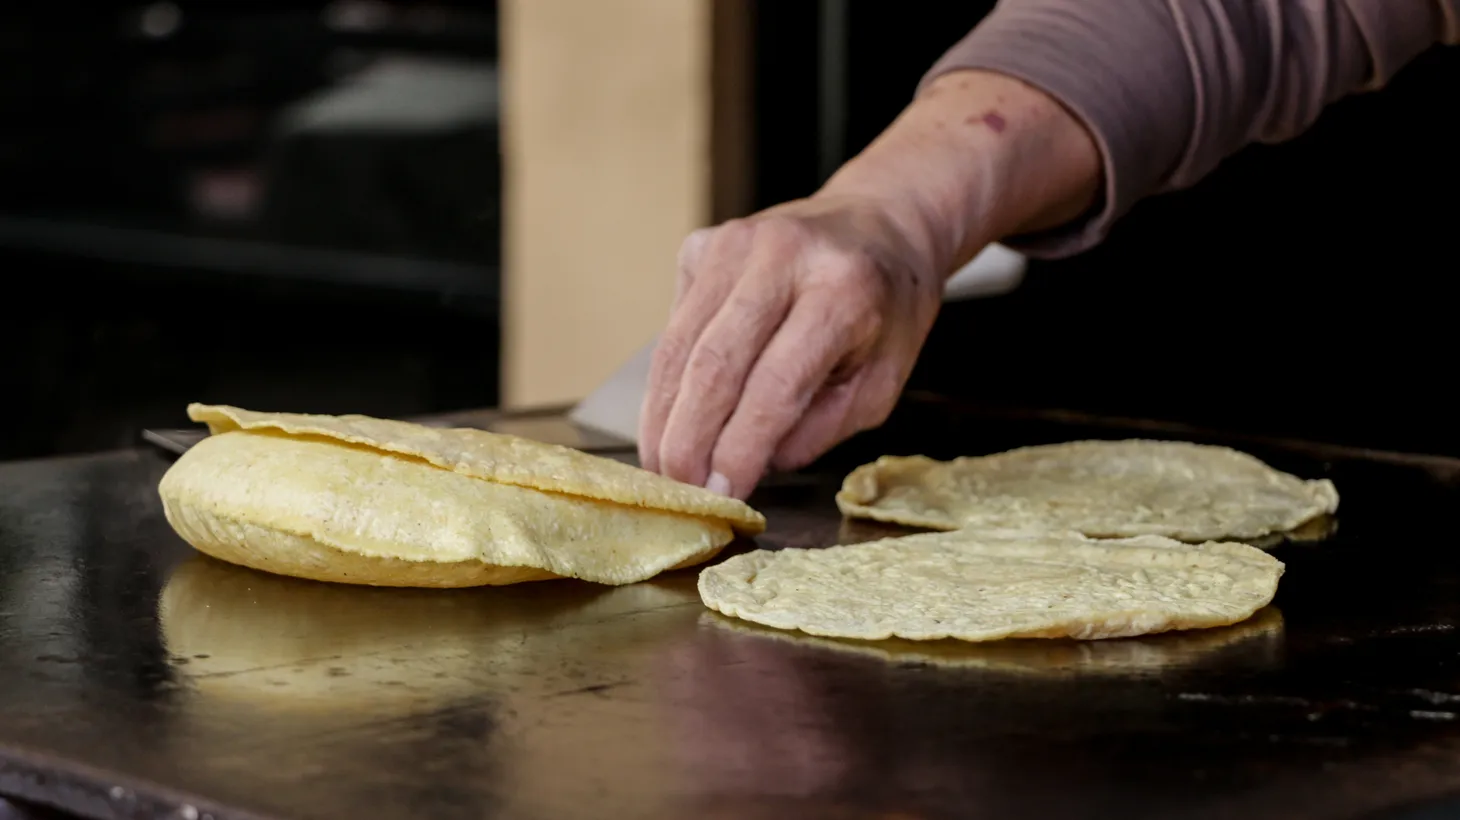 https://www.kcrw.com/culture/shows/good-food/cheat-sheet-2023-tortilla-tournament-finalists/@@images/image/page-header?v=1696614757.25